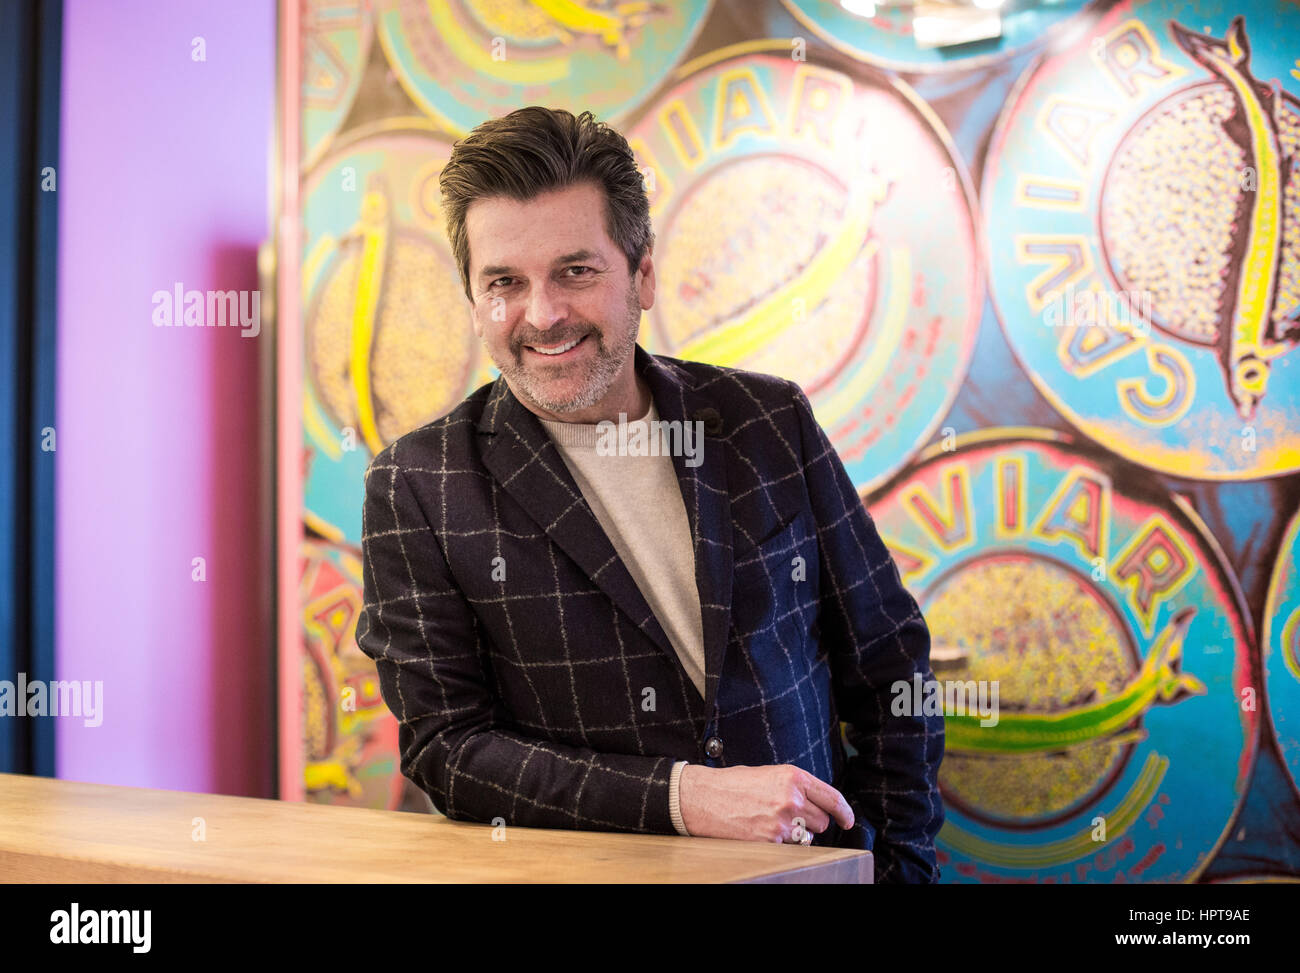 Hamburg, Germany. 21st Feb, 2017. A portrait of German singer Thomas Anders shot at a photocall in a hotel in Hamburg, Germany, 21 February 2017. Photo: Christian Charisius/dpa/Alamy Live News Stock Photo